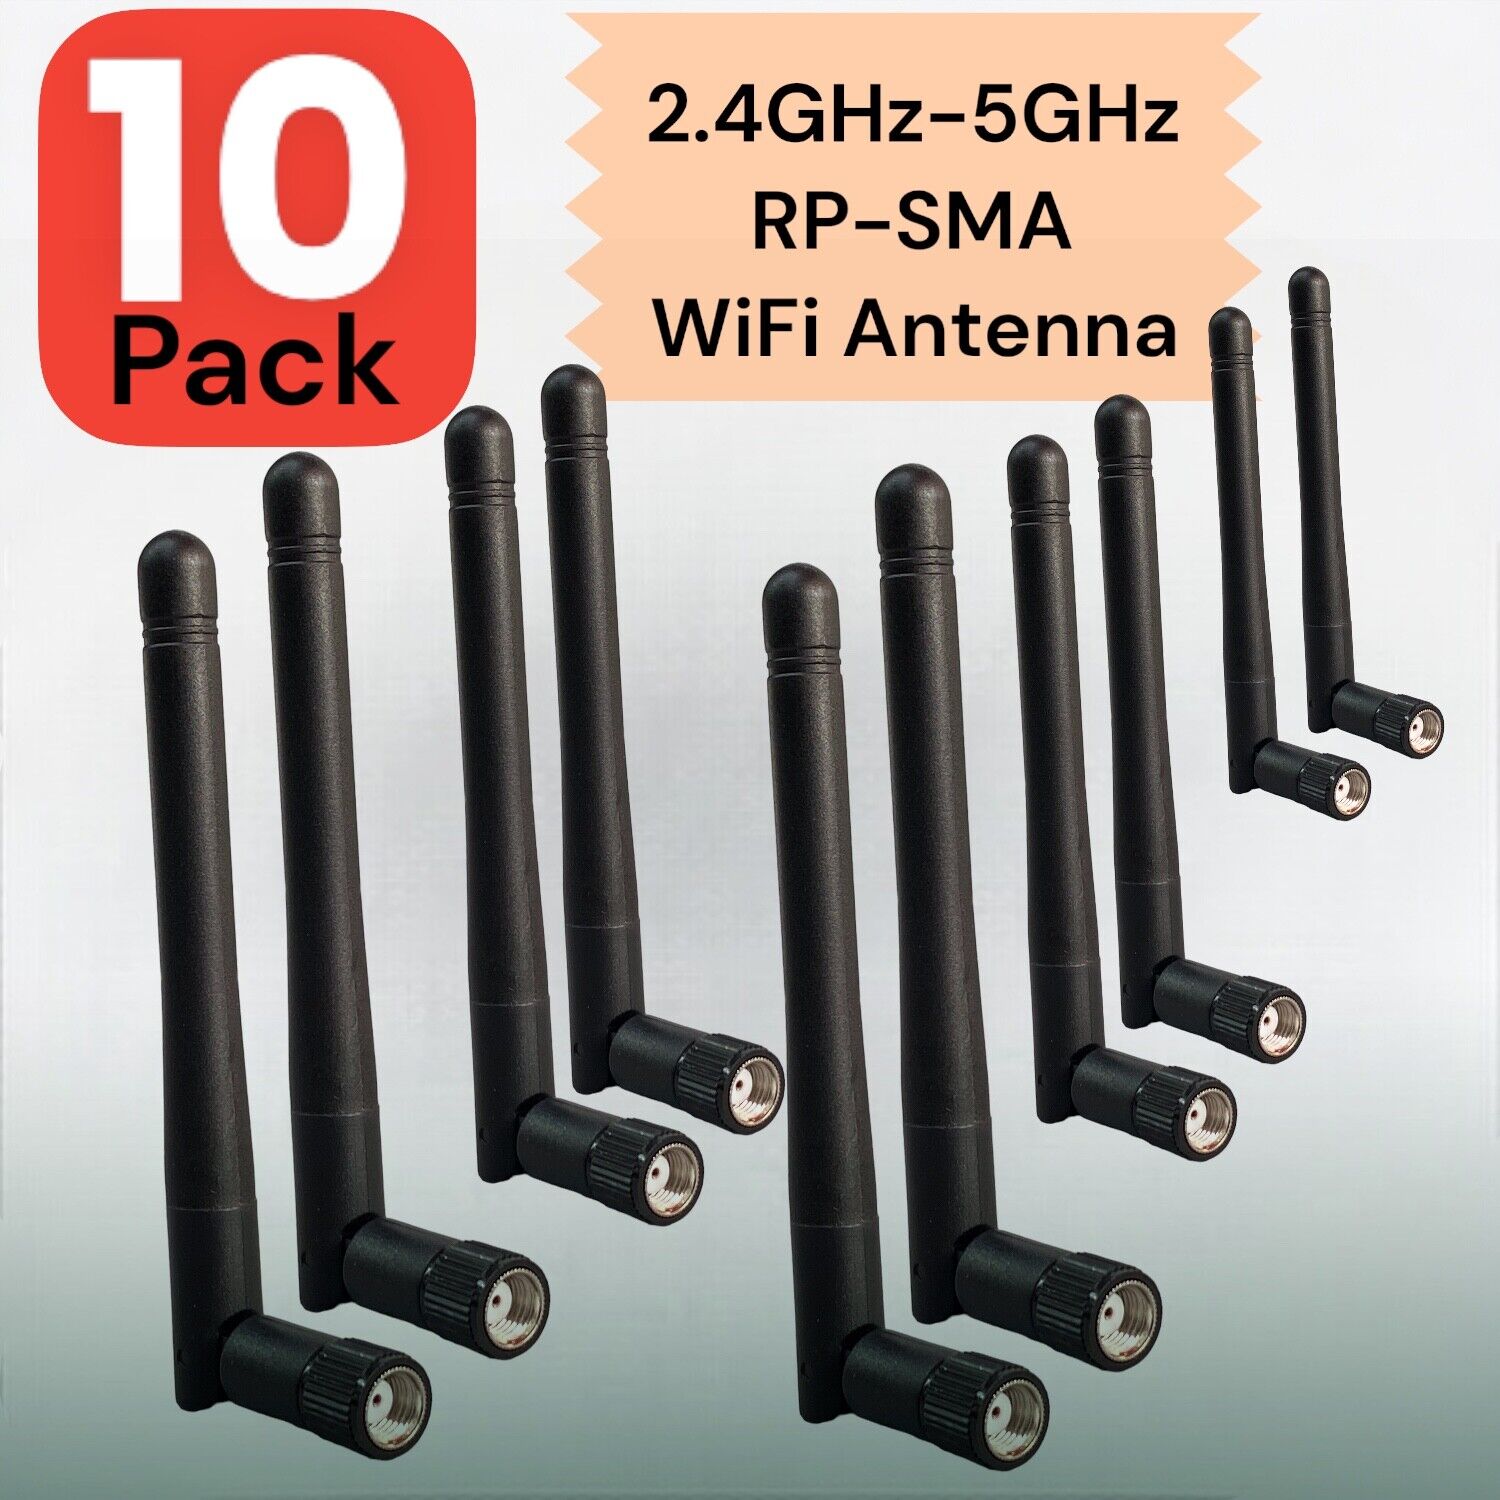 Lot of 10-RP-SMA Antenna for WiFi 2.4GHz 5Ghz Wireless Router or Card Female Pin